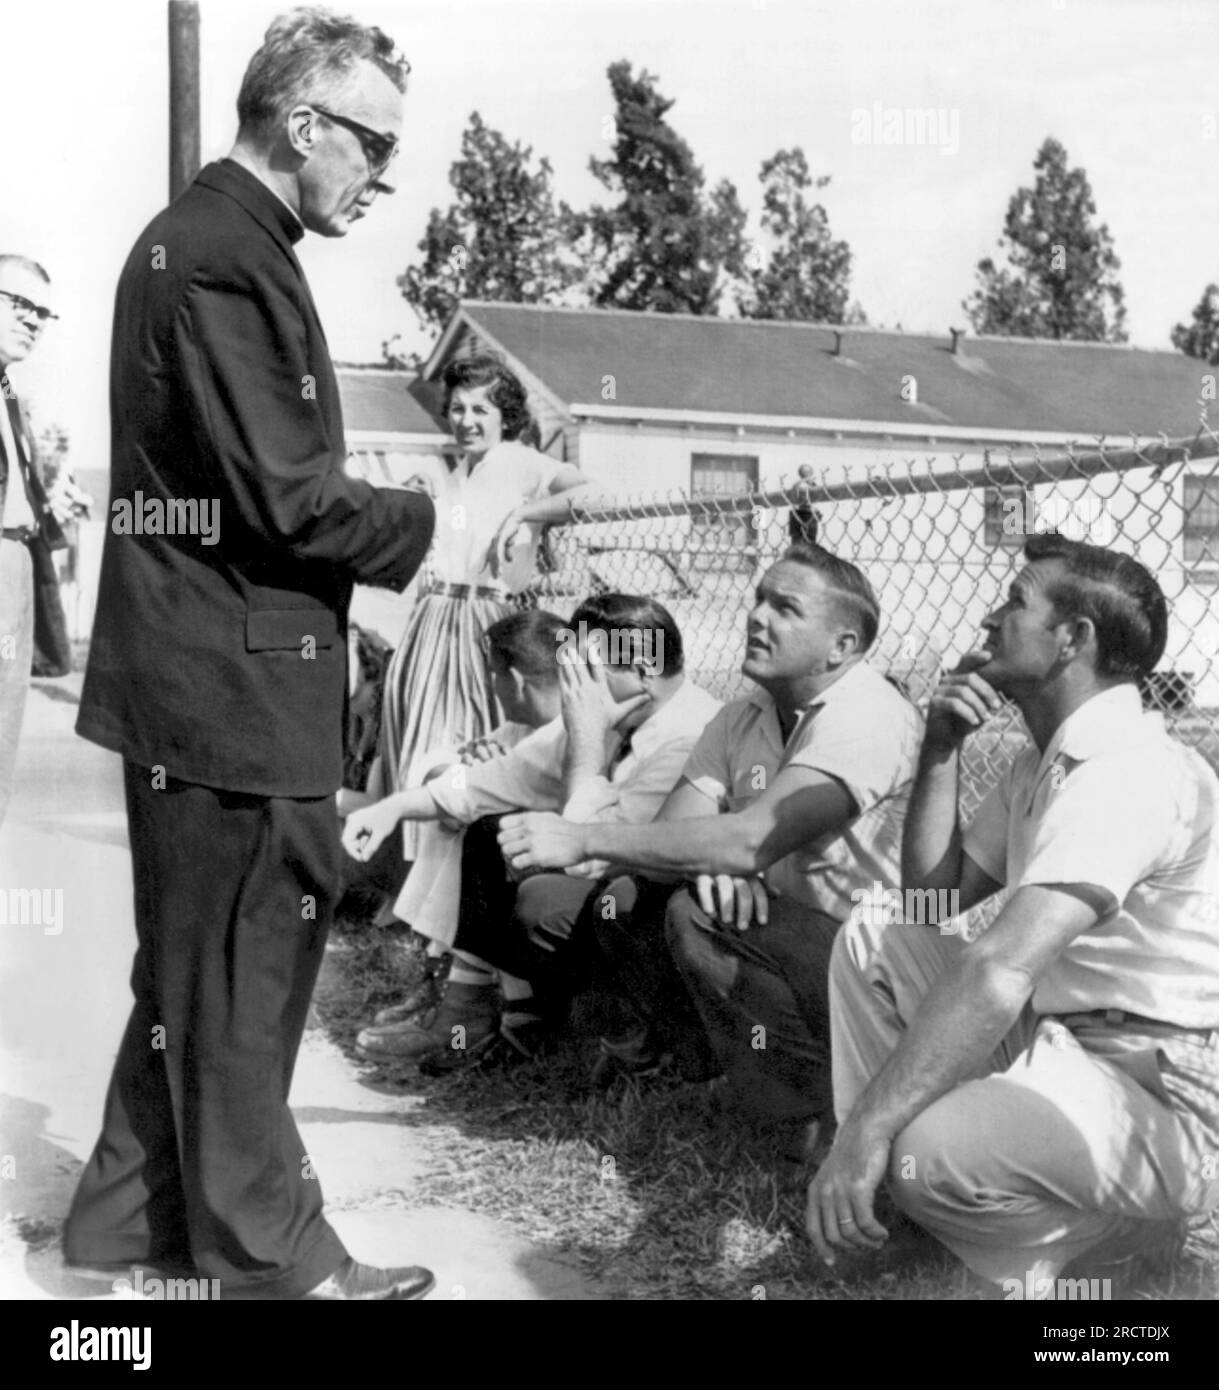 New Orleans, Louisiana:  November 28, 1960 A Catholic priest confronts hecklers around the William Frantz Elementary School during its first days of integration. The priest was jeered and shoved for his efforts. Stock Photo